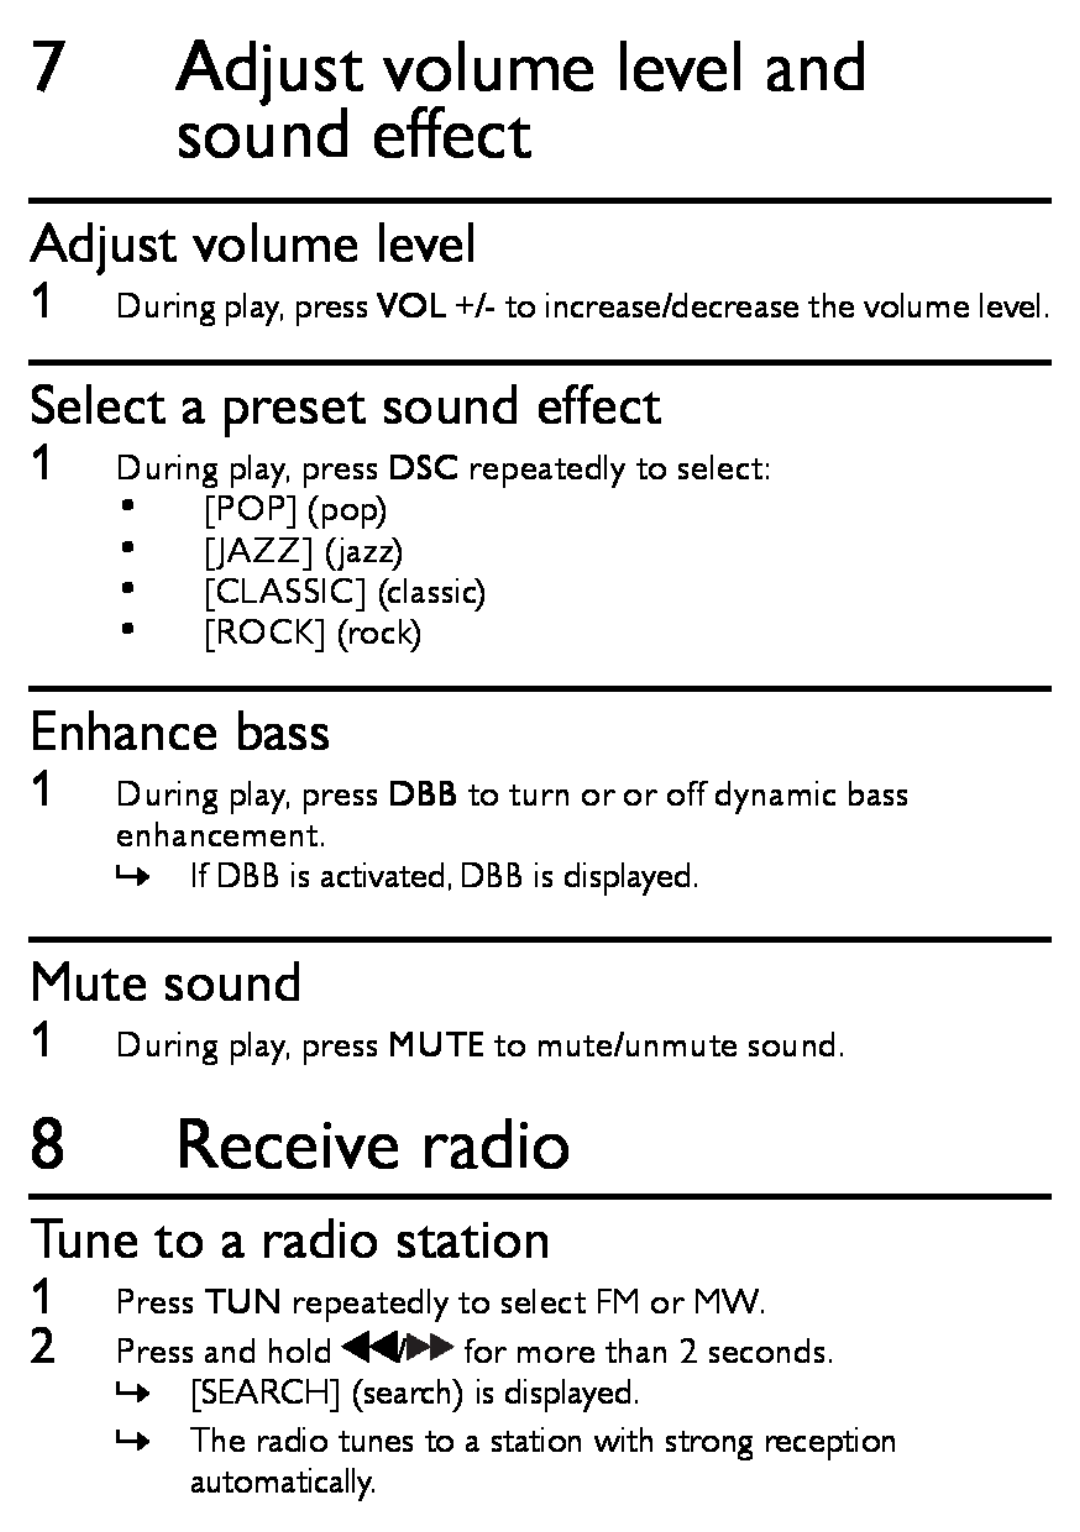 Philips MCM166/12 7Adjust volume level and sound effect, Receive radio, Select a preset sound effect, Enhance bass 